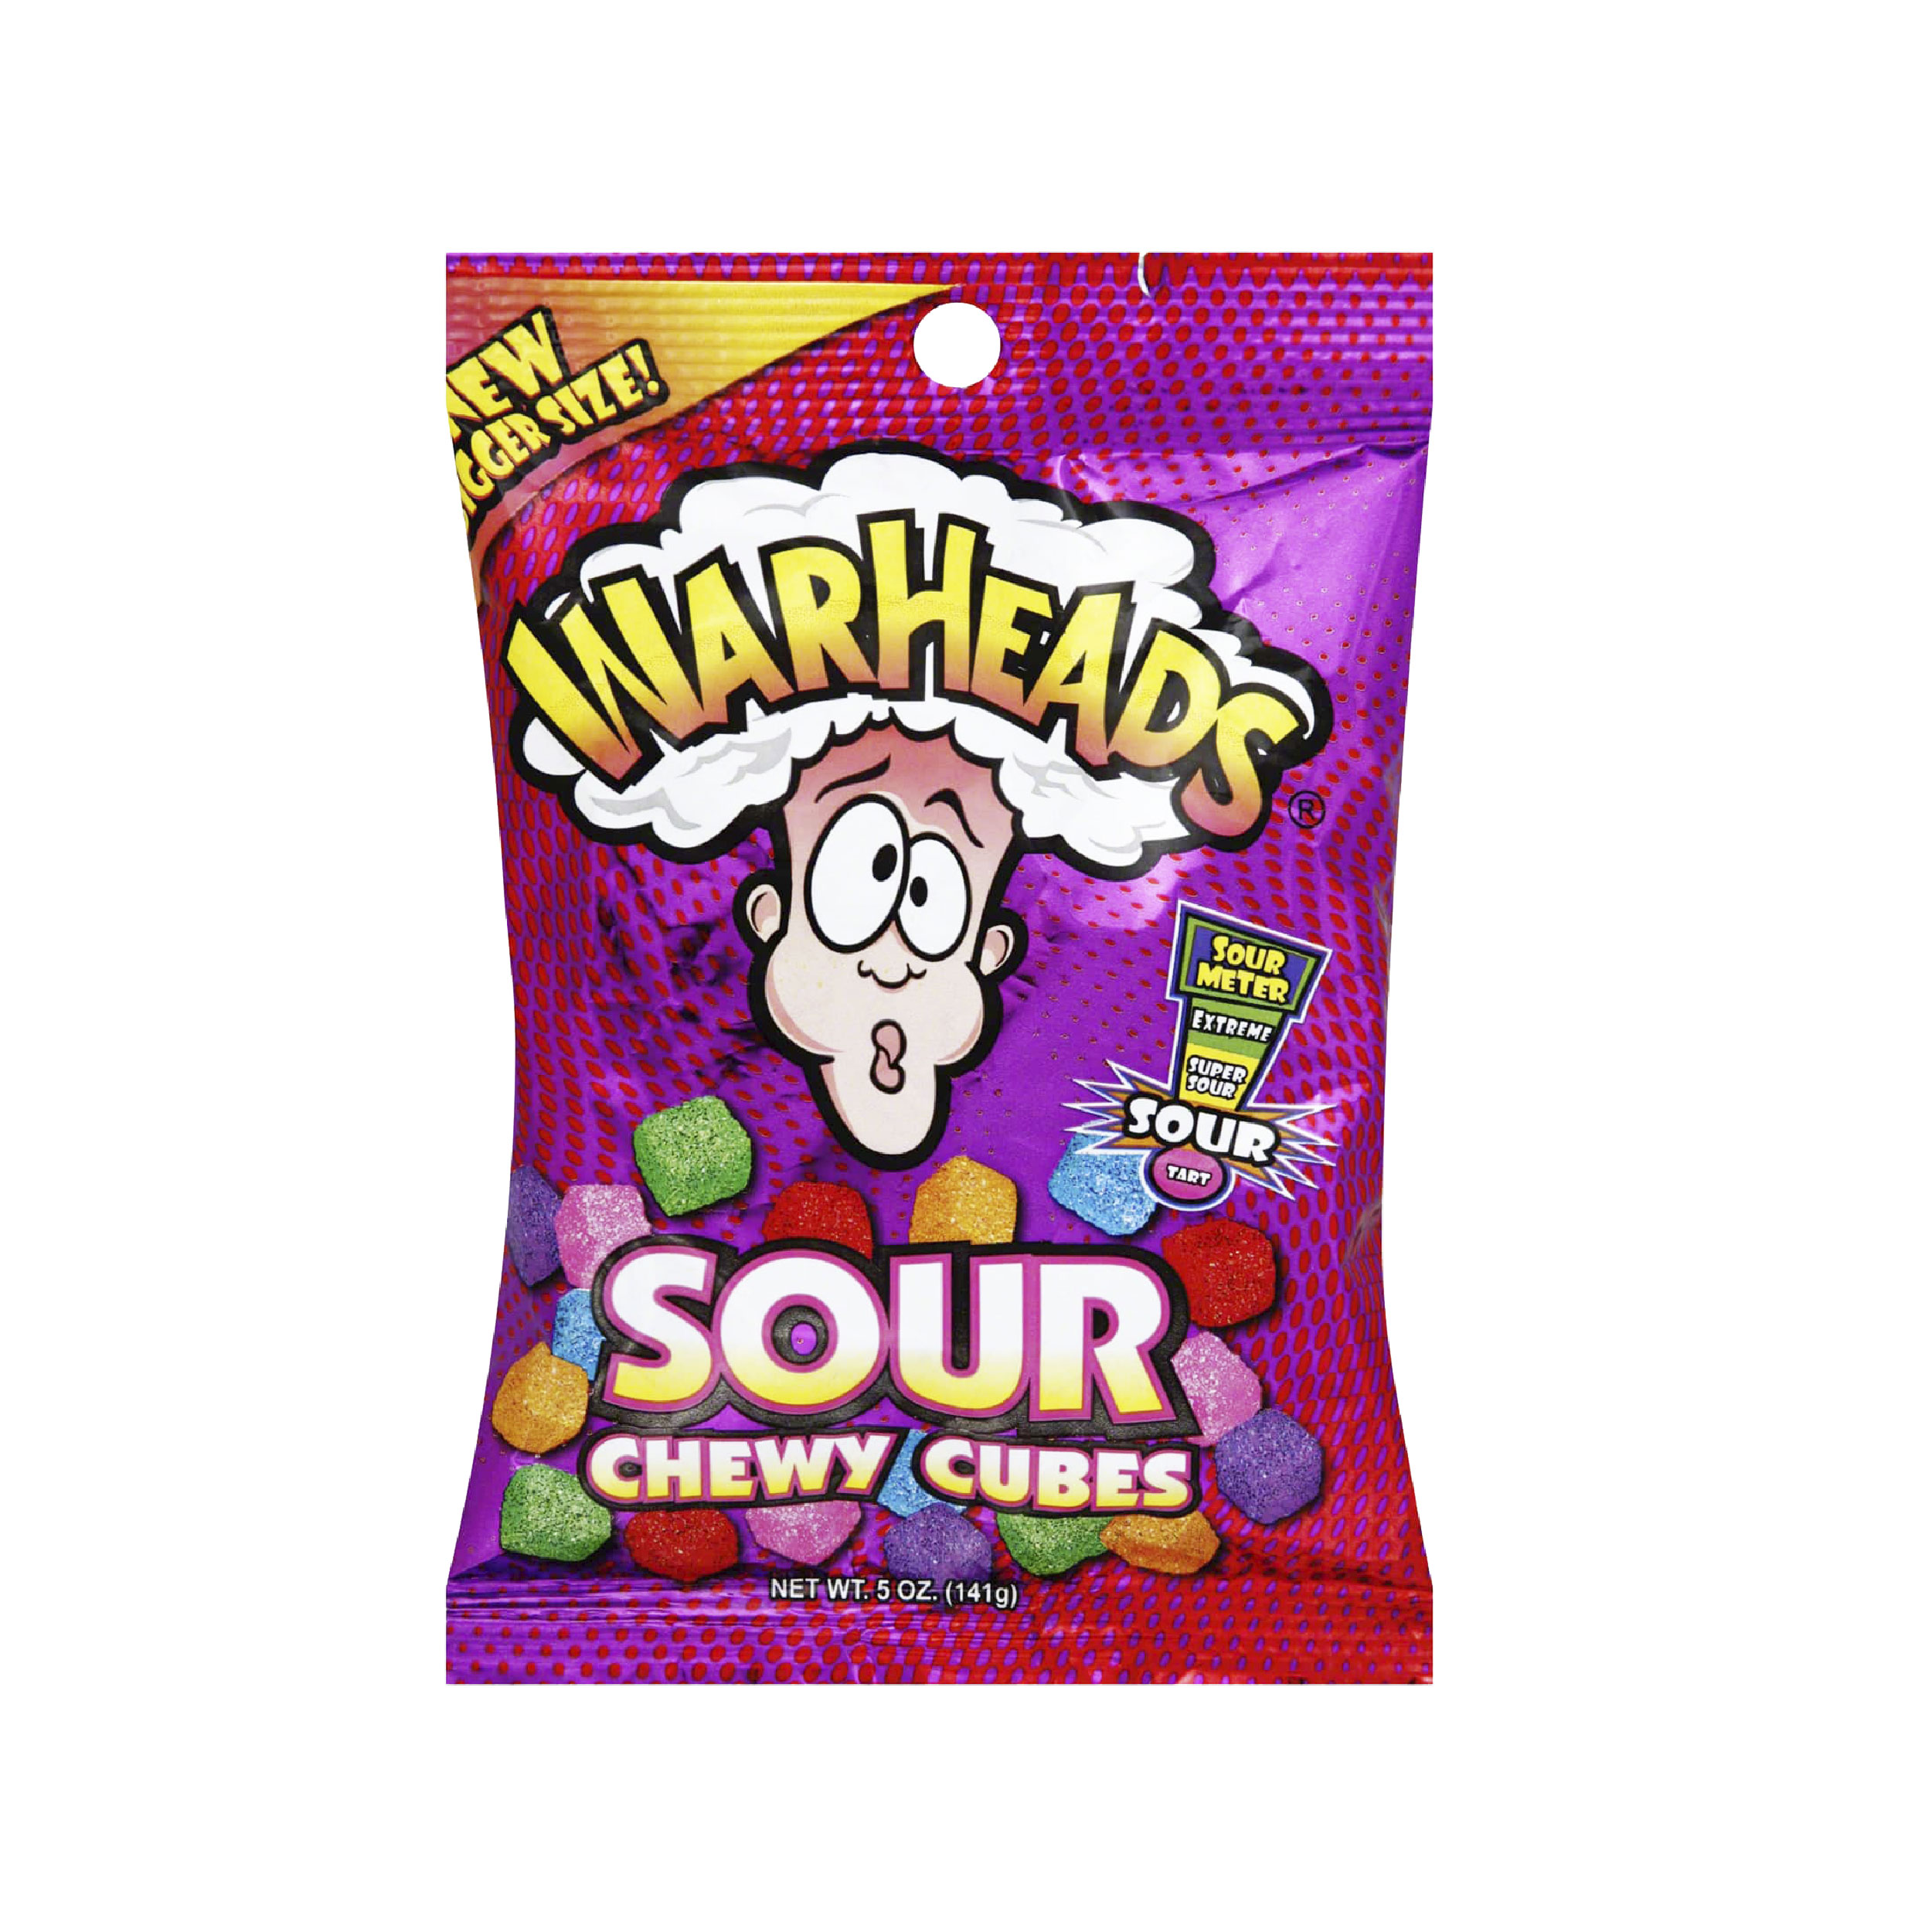 WARHEADS SOUR CHEWY CUBES PEG BAG 141g